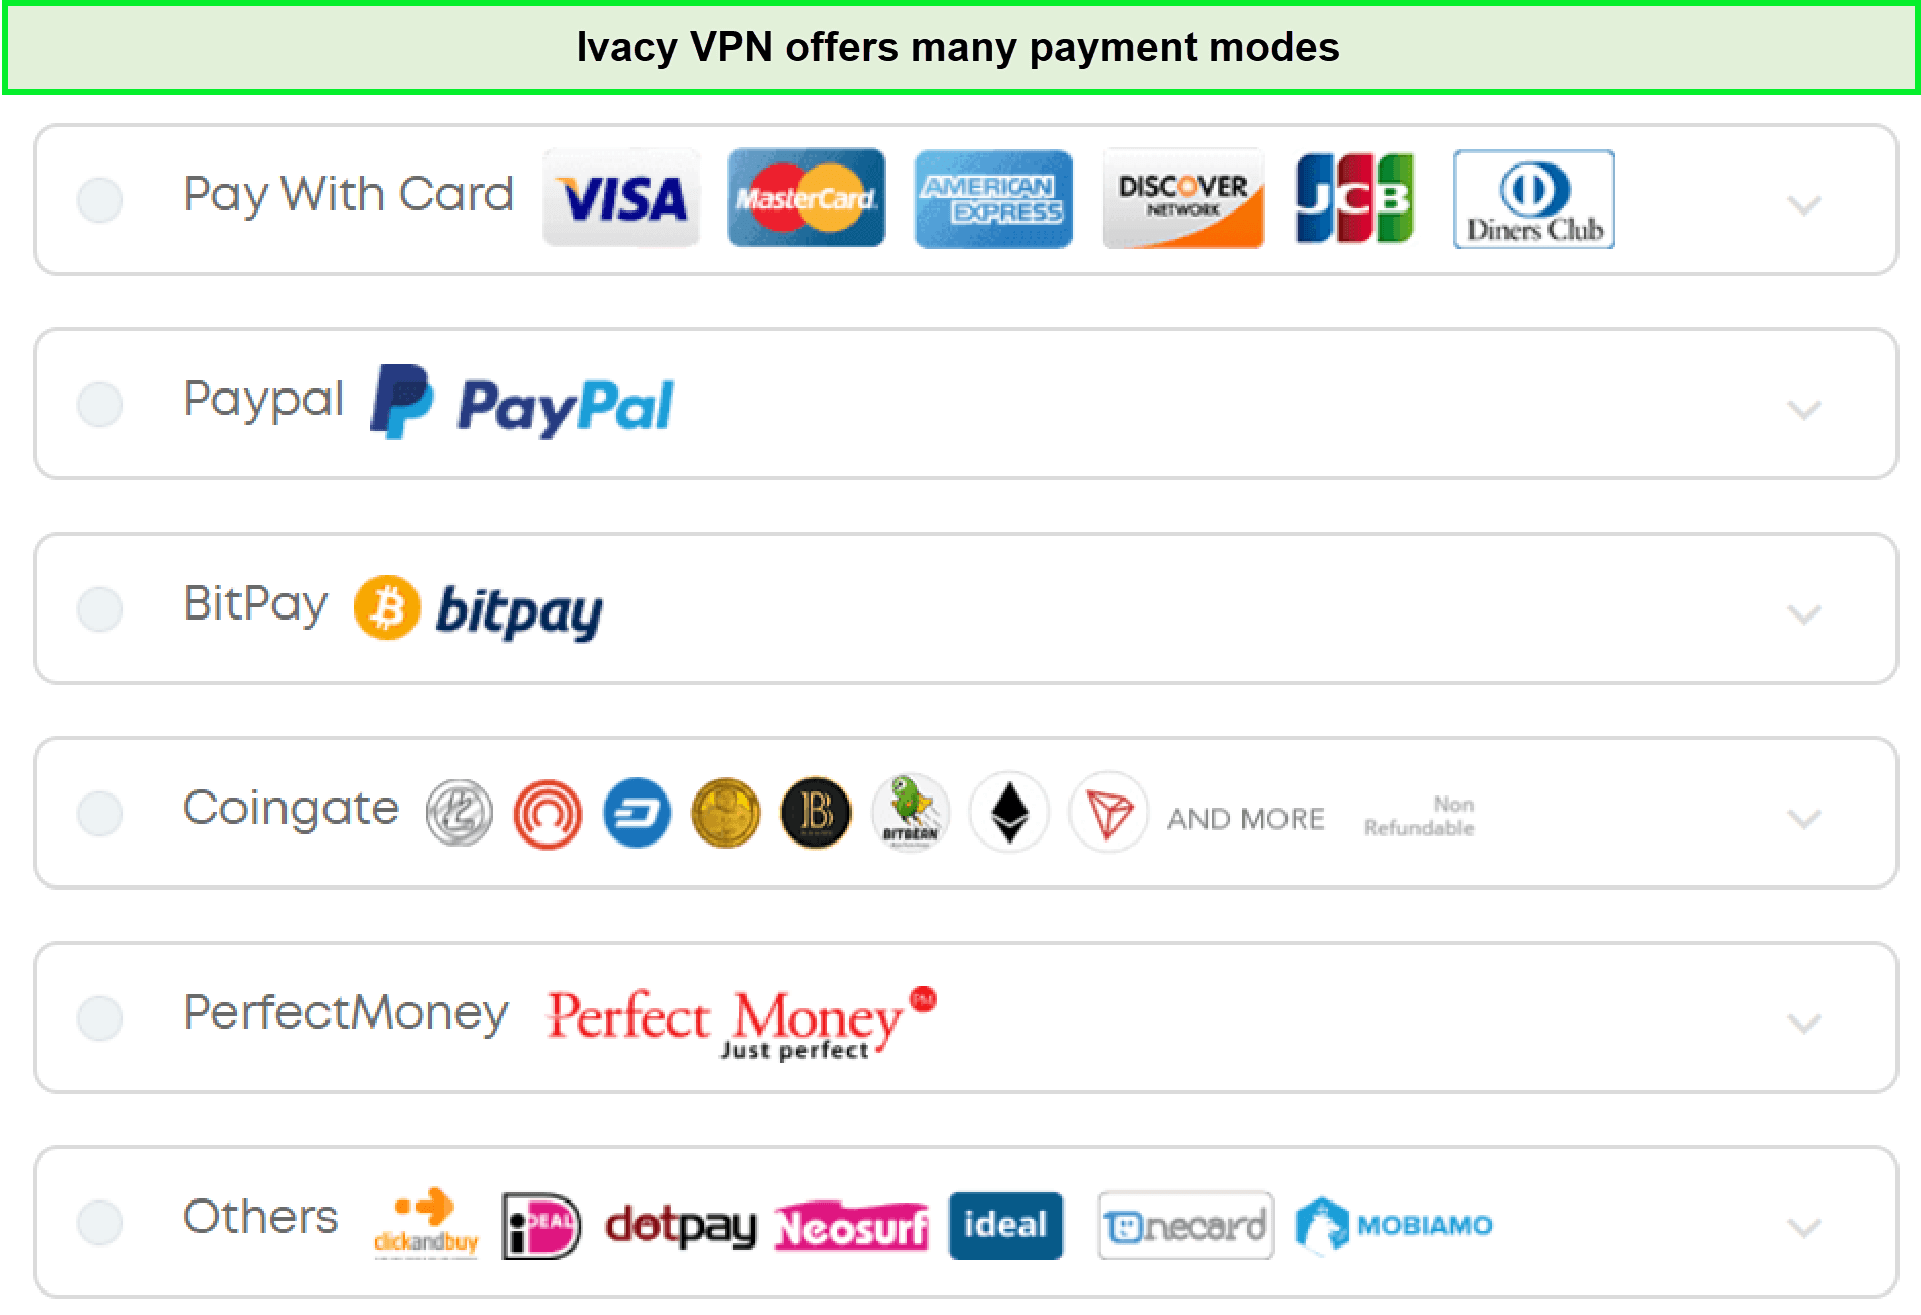 ivacy-payment-modes-in-Netherlands